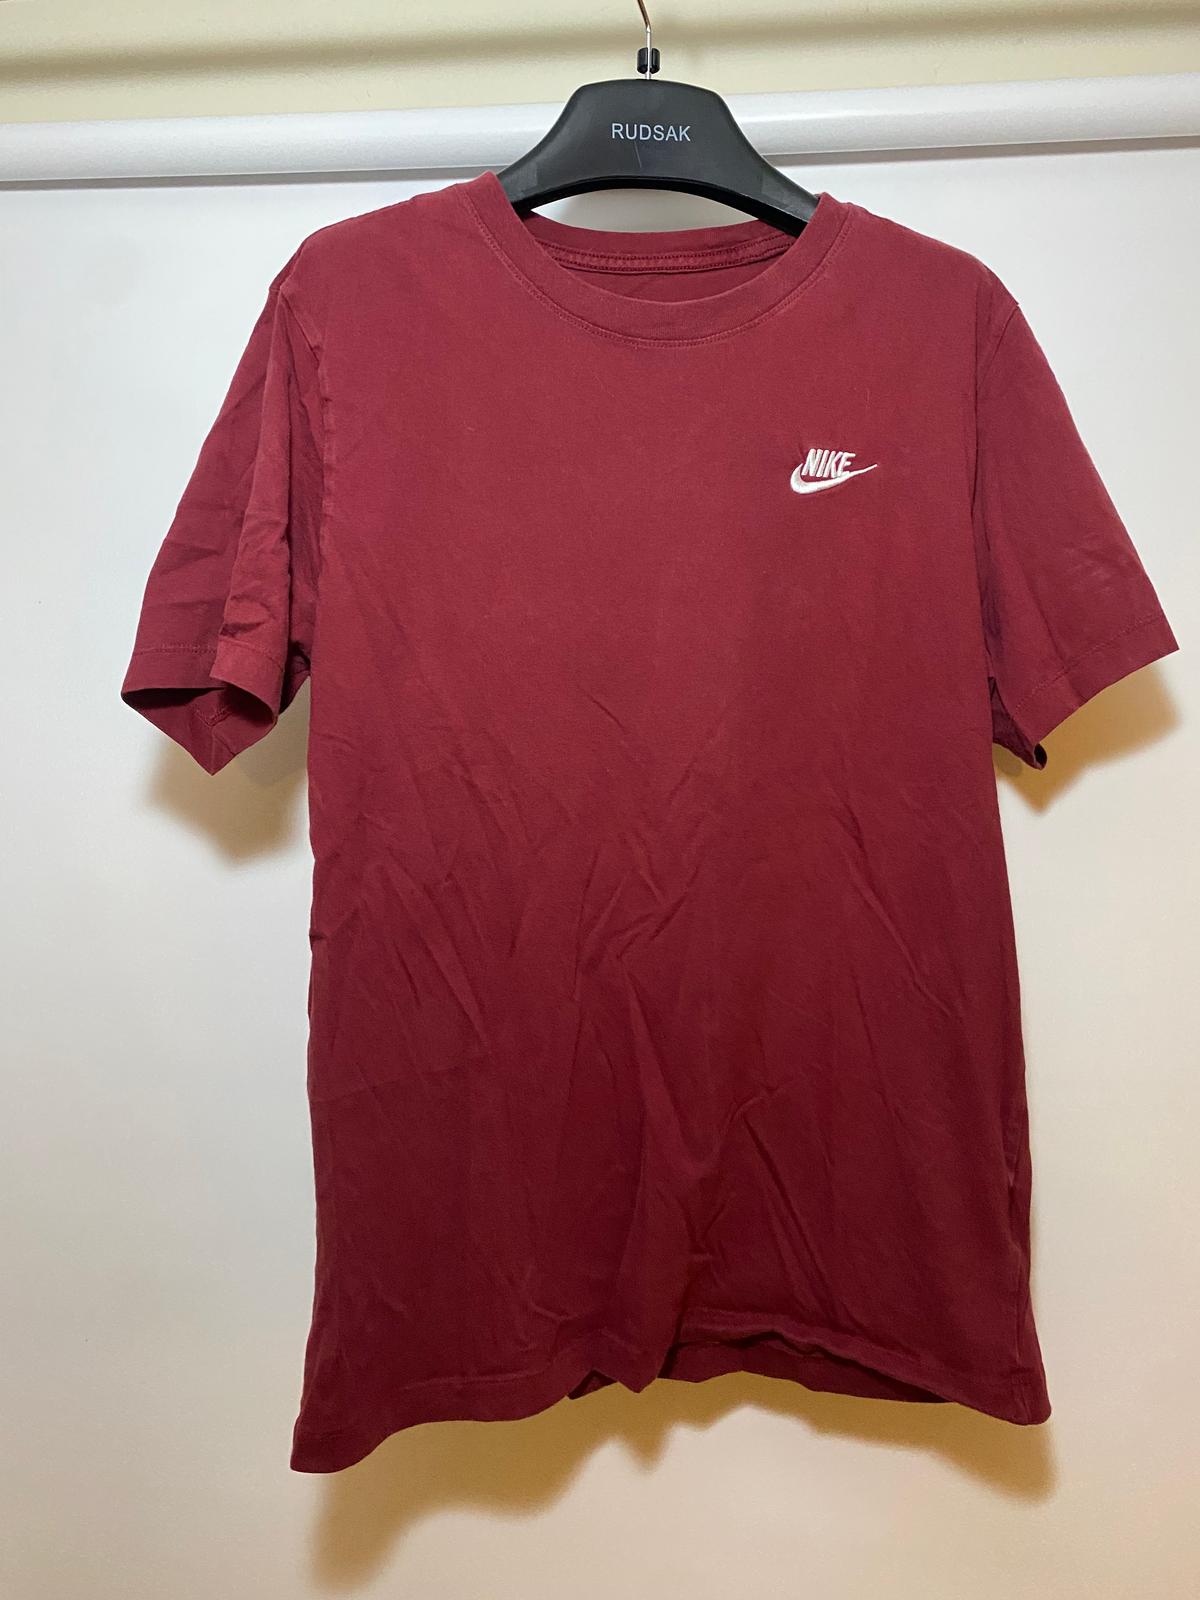 Photo of Tee-shirt Nike Manches Courtes Bordeaux - Taille M